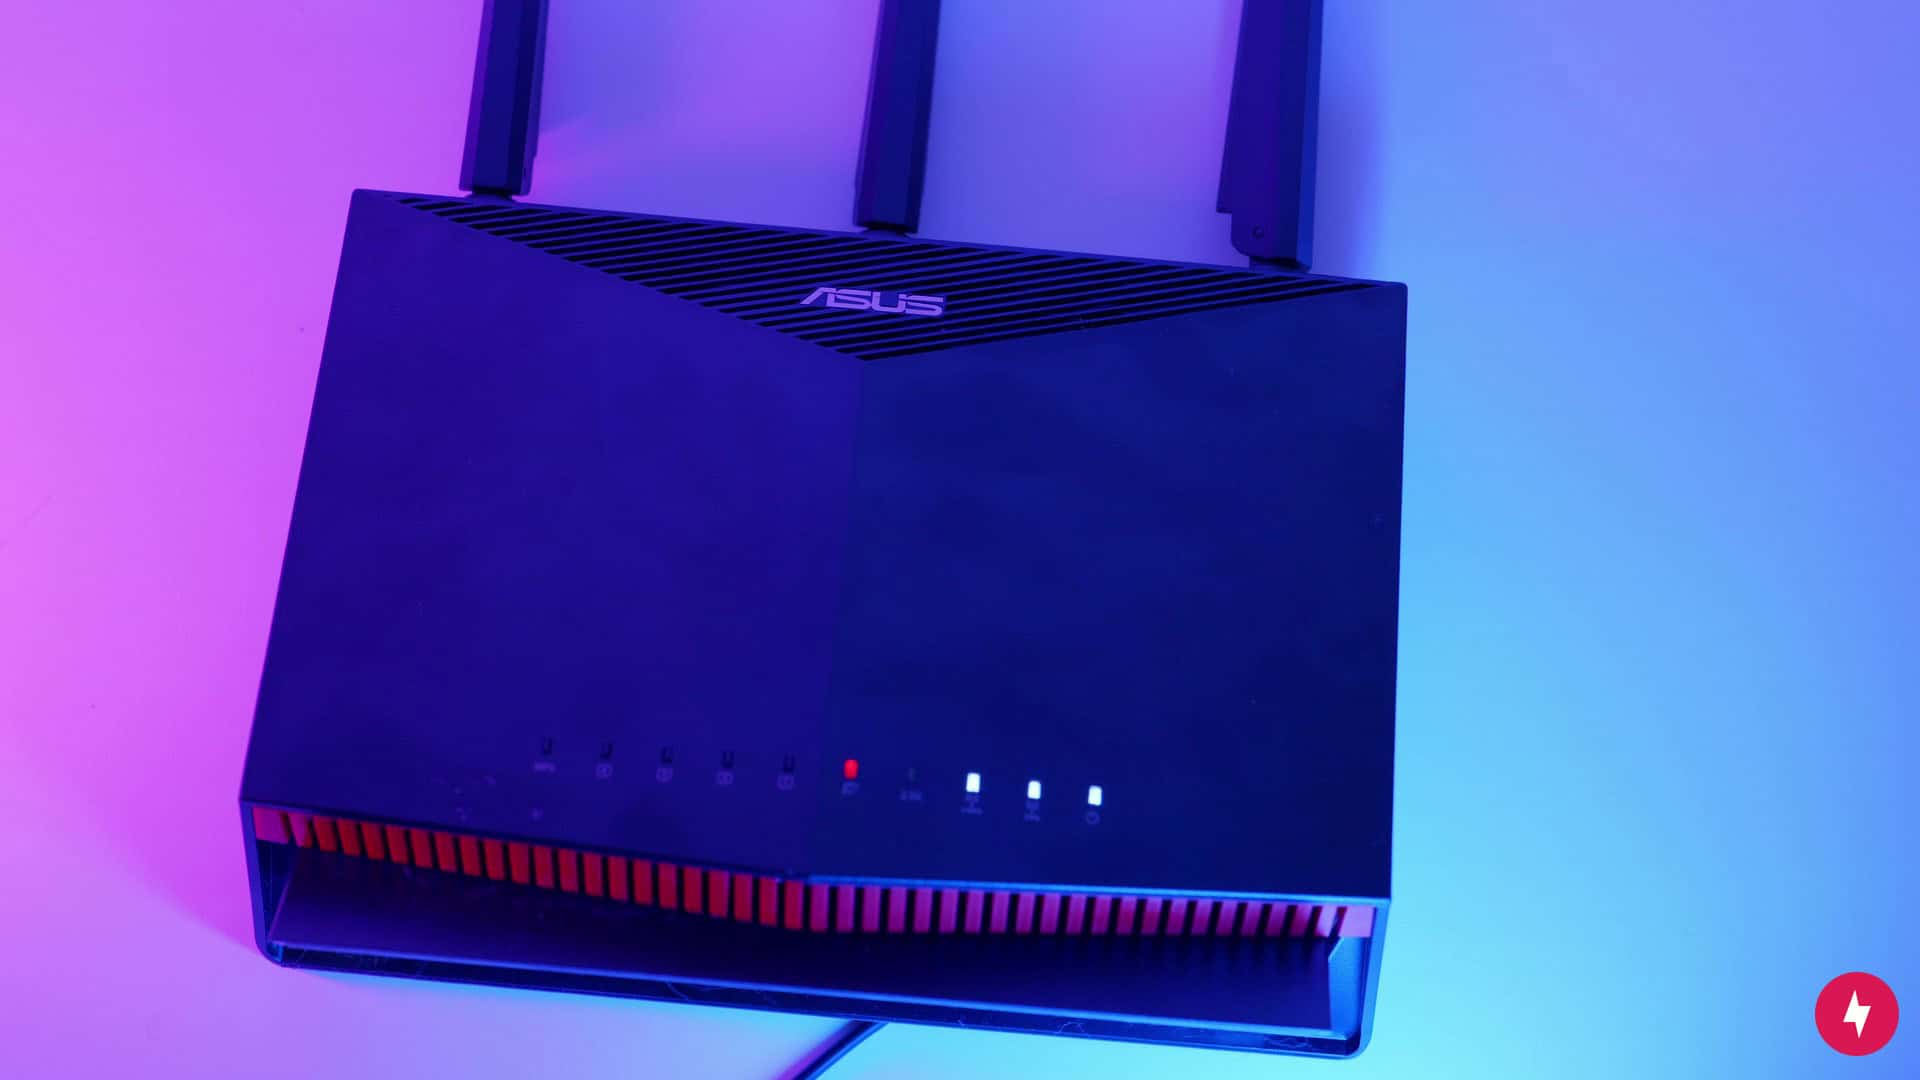 An Asus RT-AX86U Pro router on a pink and blue background.